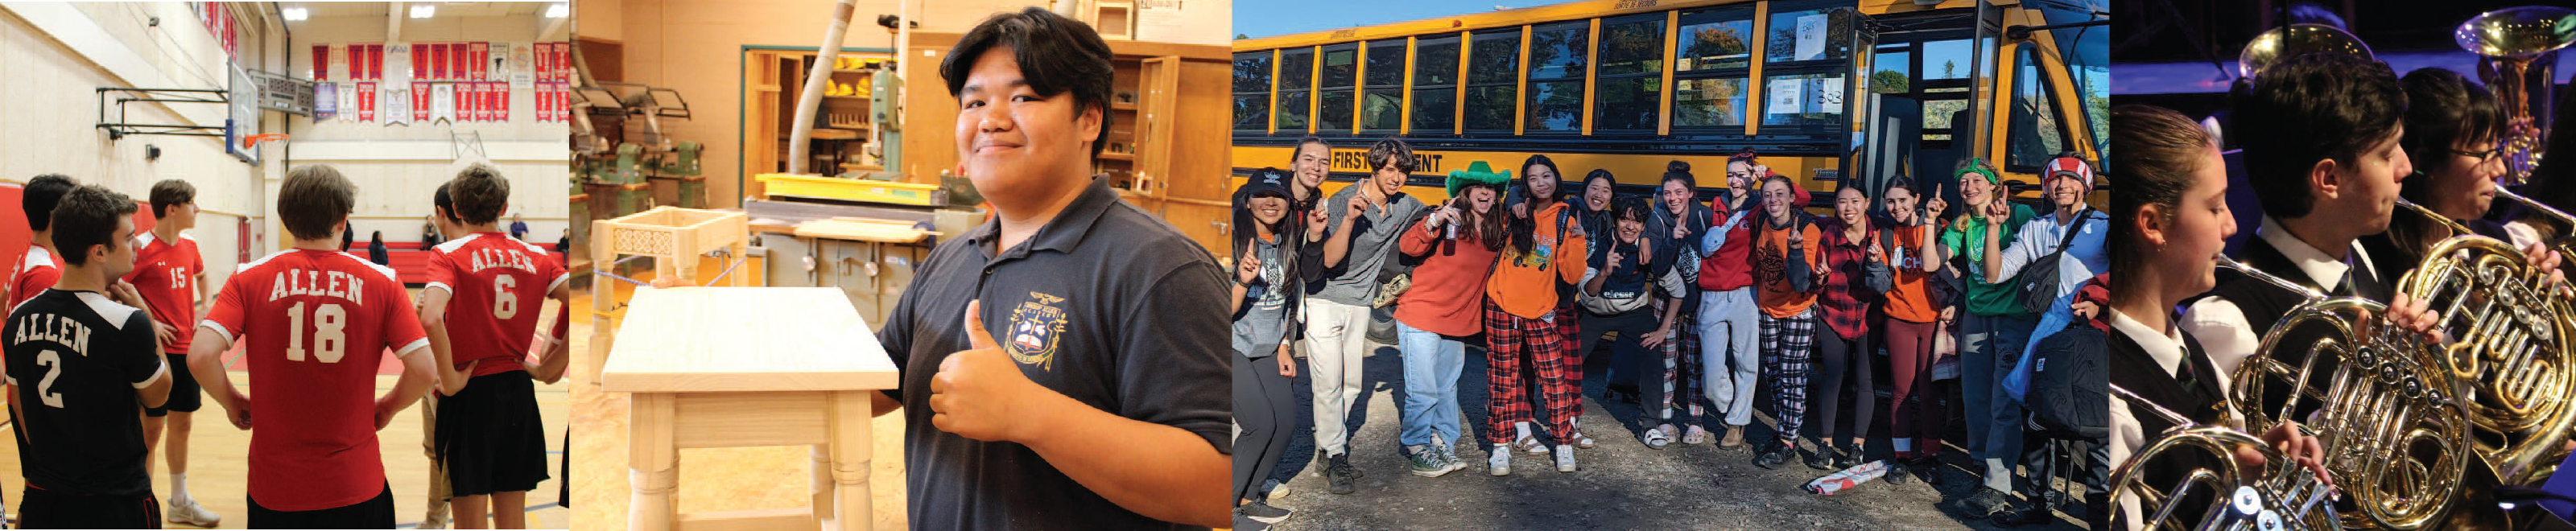 First image features a team of male volleyball students. Second image consists of a male student in uniform in a wood working class. Third image consists of a group of students standing in front of a school bus. The forth image consists of a group of students playing musical instruments. 